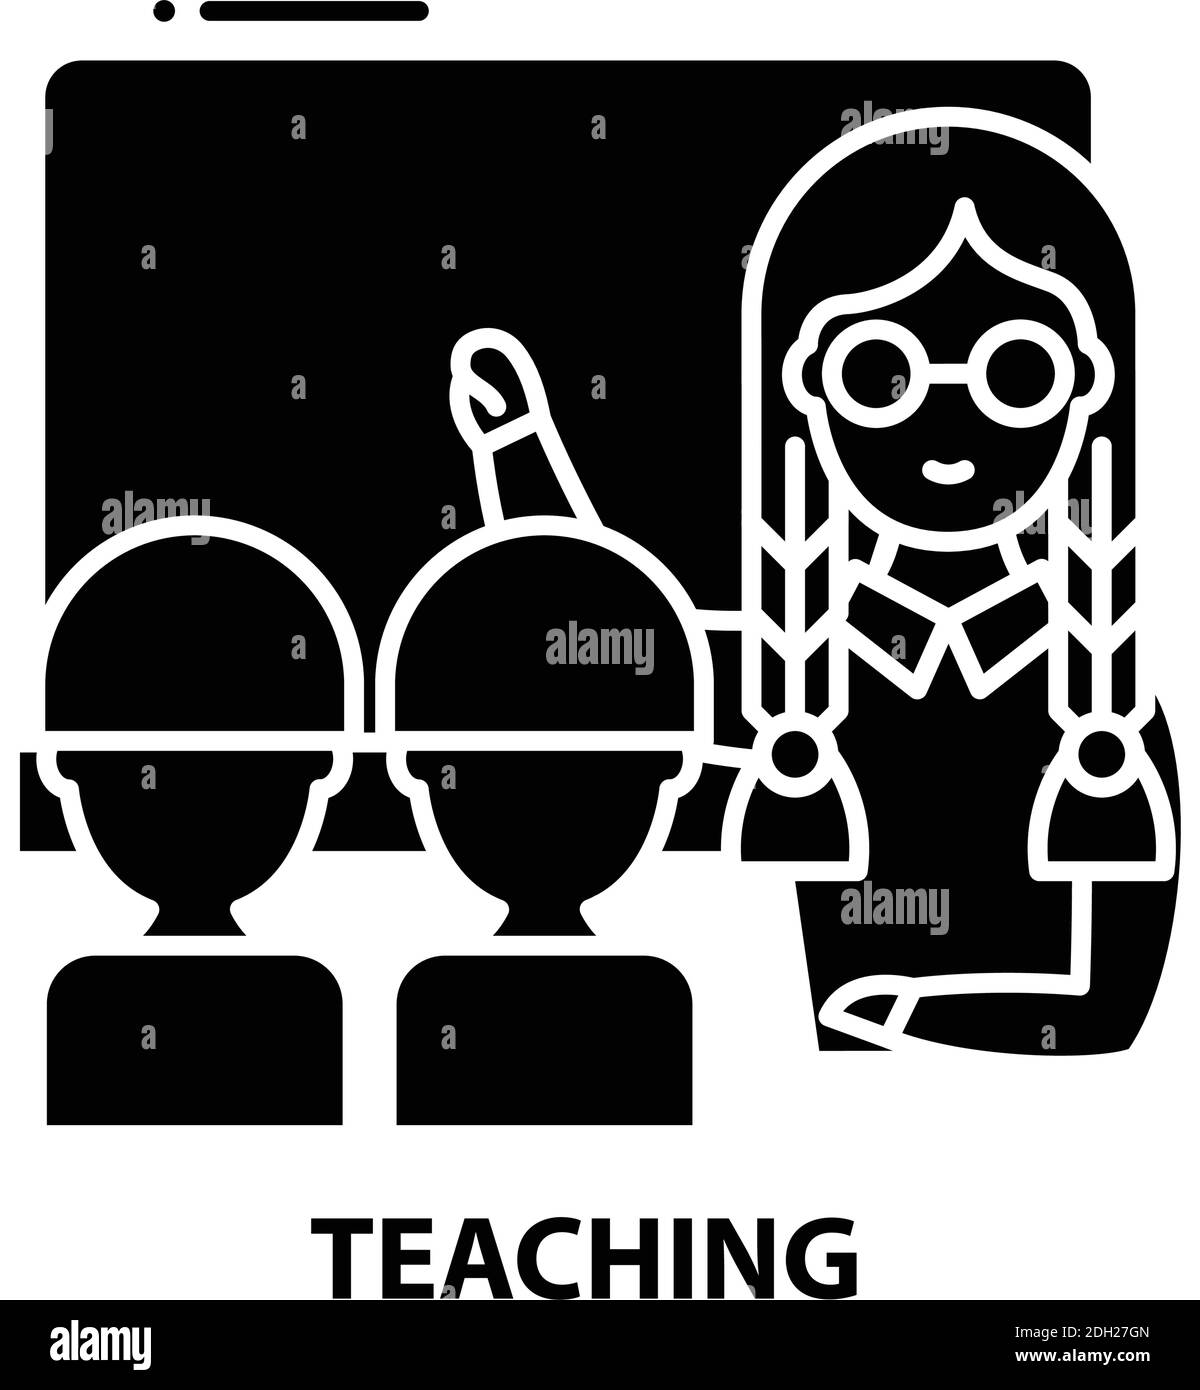 teaching icon, black vector sign with editable strokes, concept illustration Stock Vector